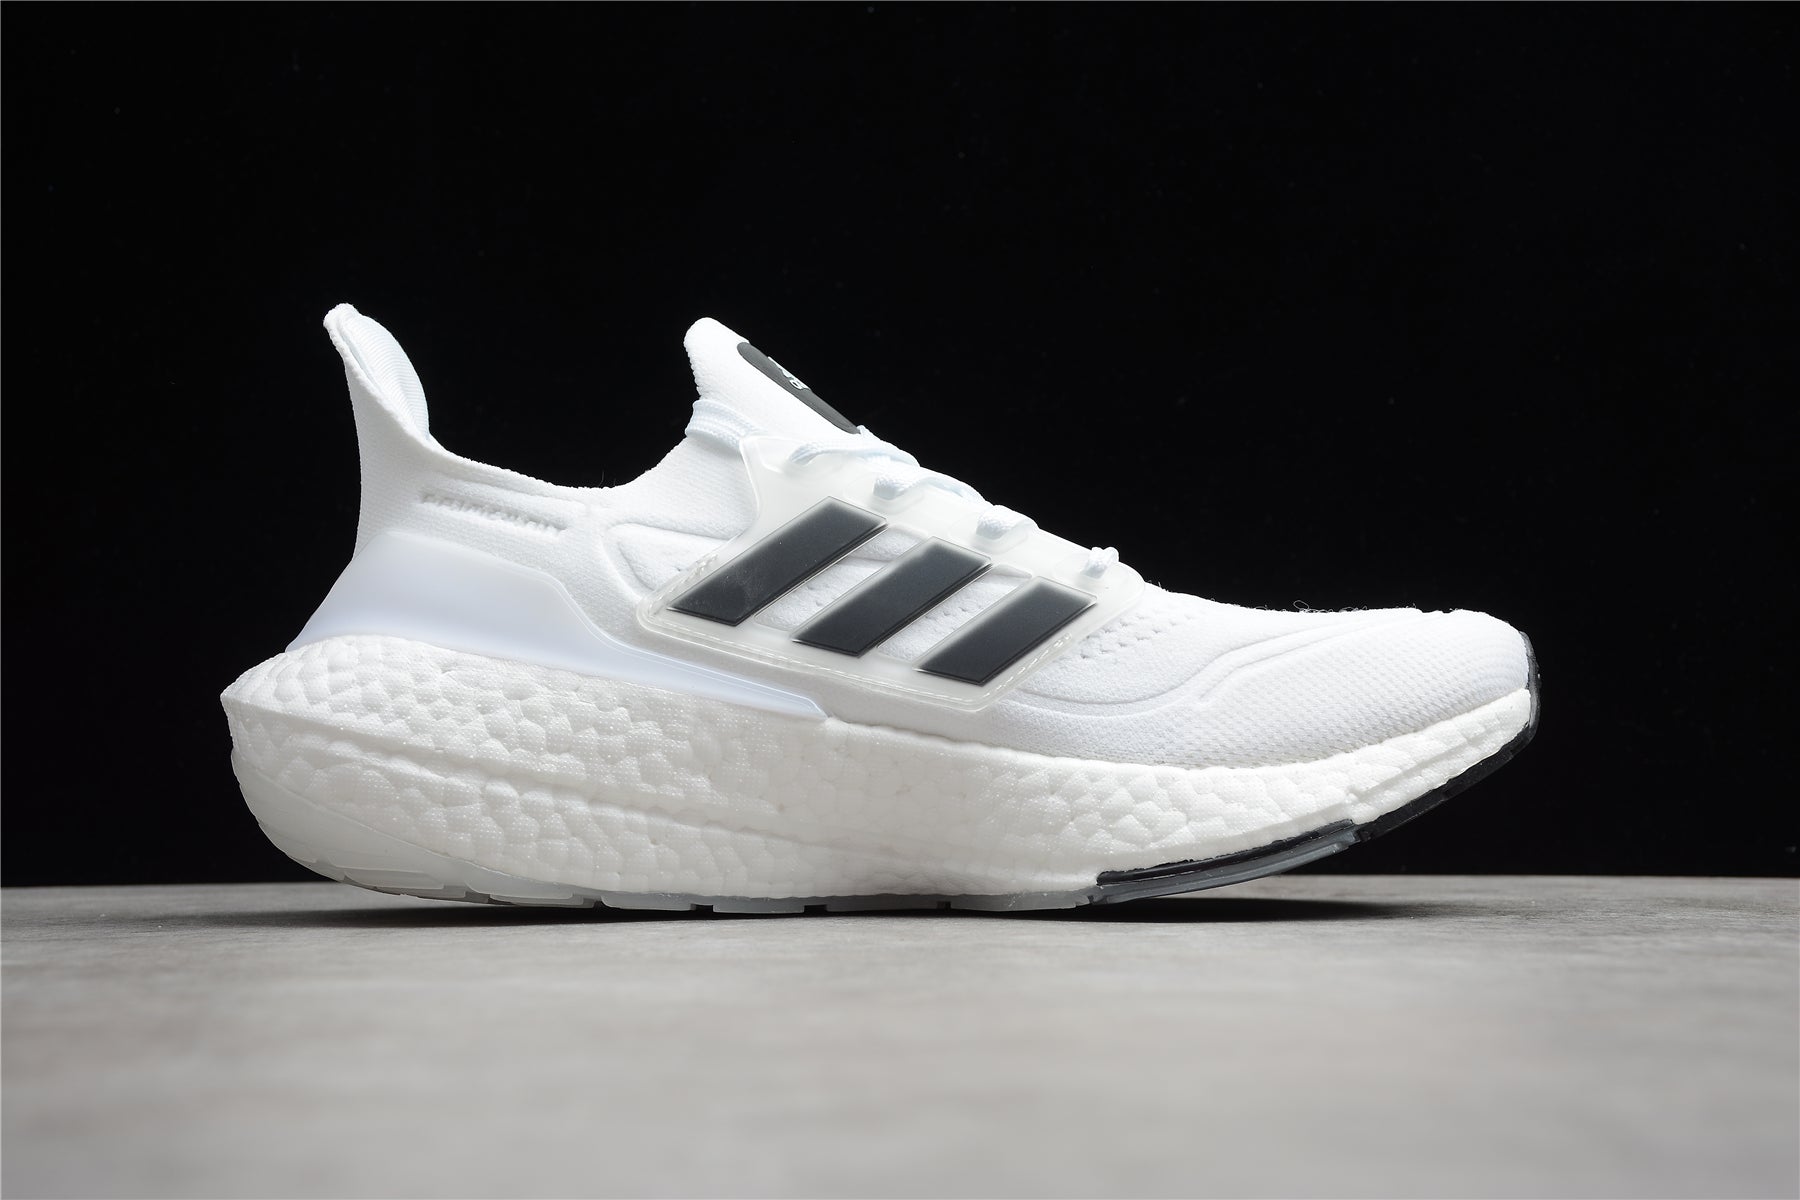 Chaussures Adidas Ultraboost noires et blanches